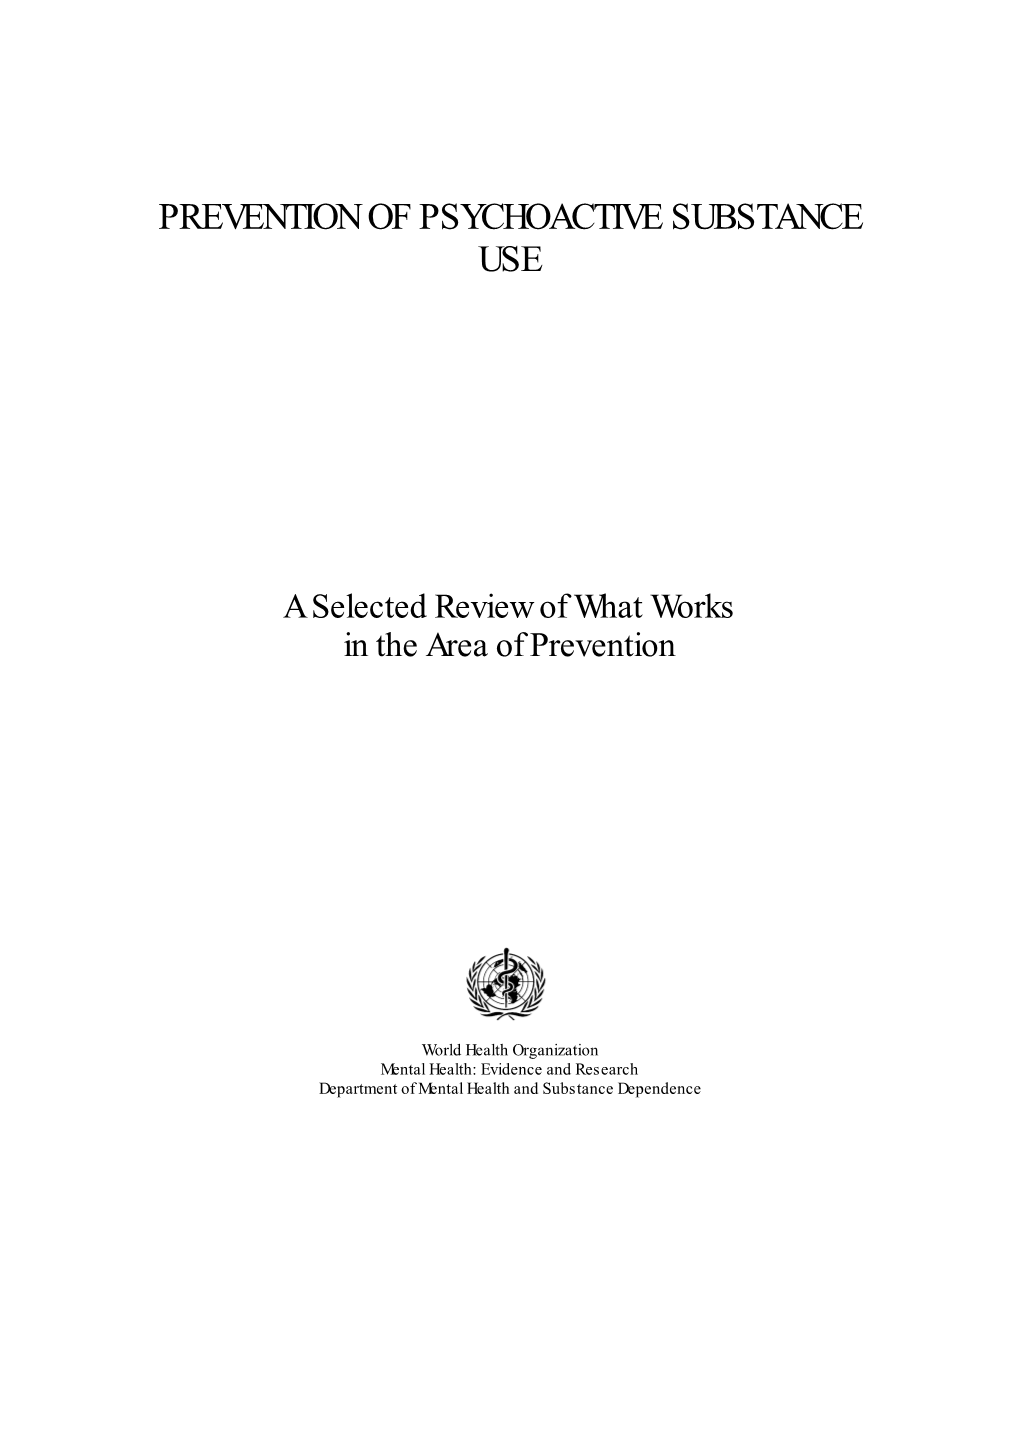 Prevention of Psychoactive Substance Use